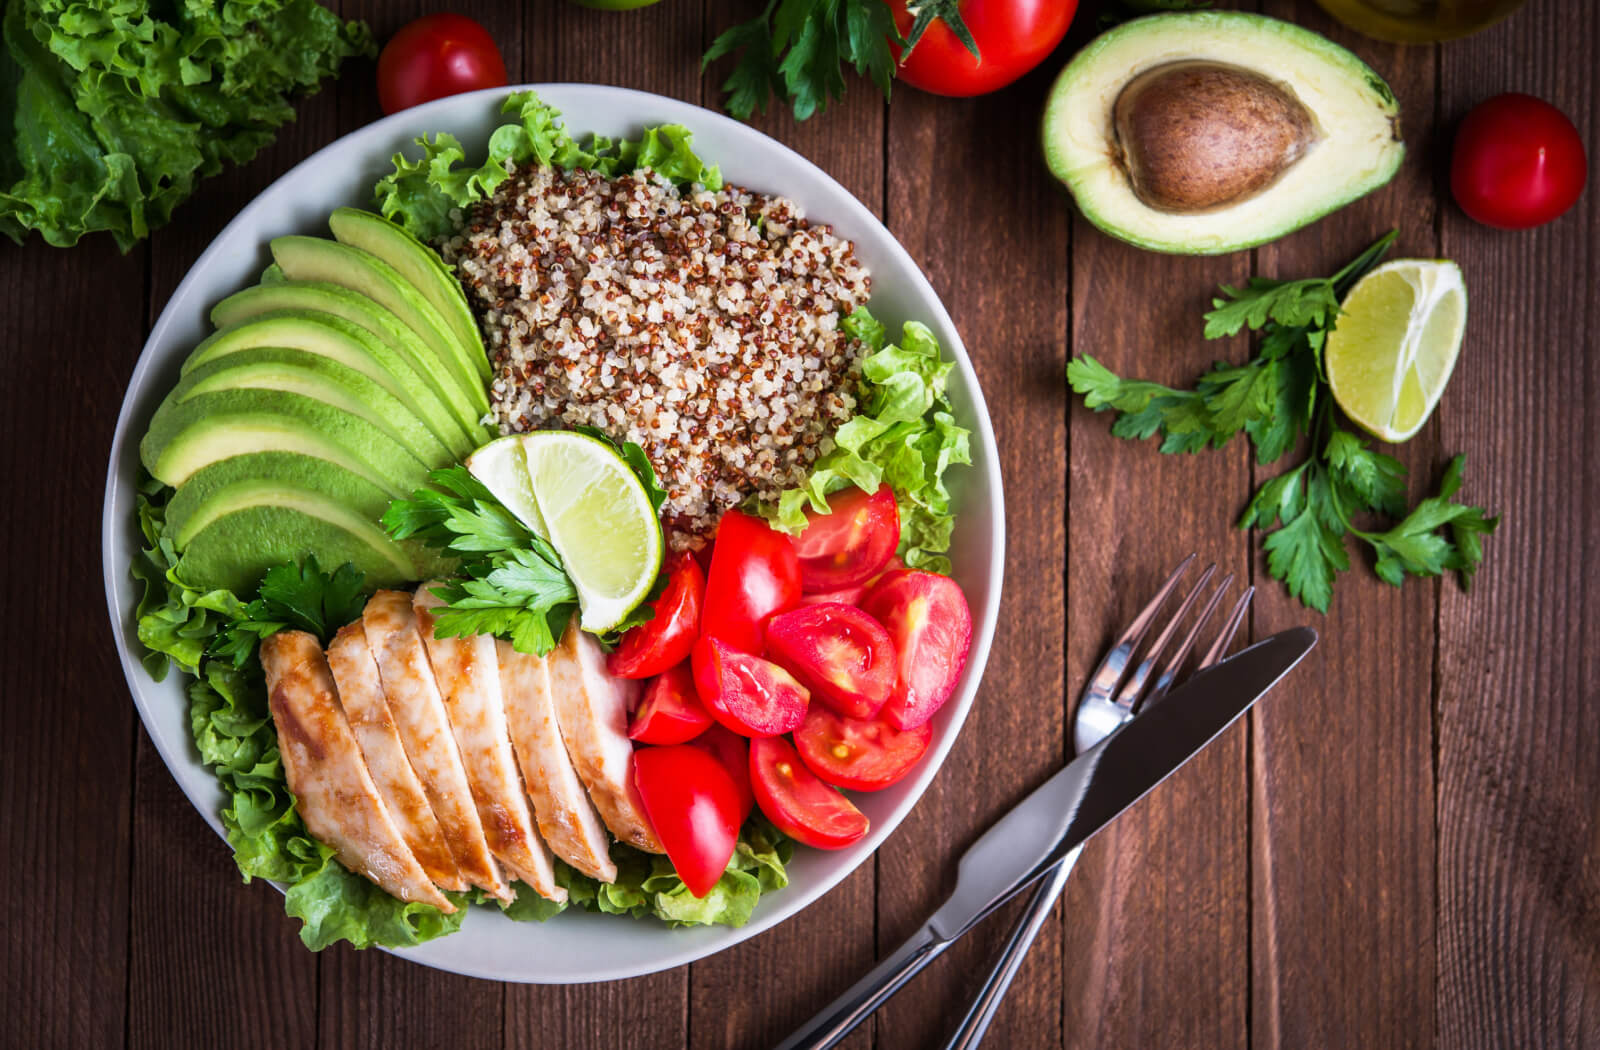 A close-up of a plate of a healthy meal, a roasted chicken, slices of avocado, tomatoes, lime, lettuce, and quinoa. A good balance diet can promote ideal weight and reduce inflammation.